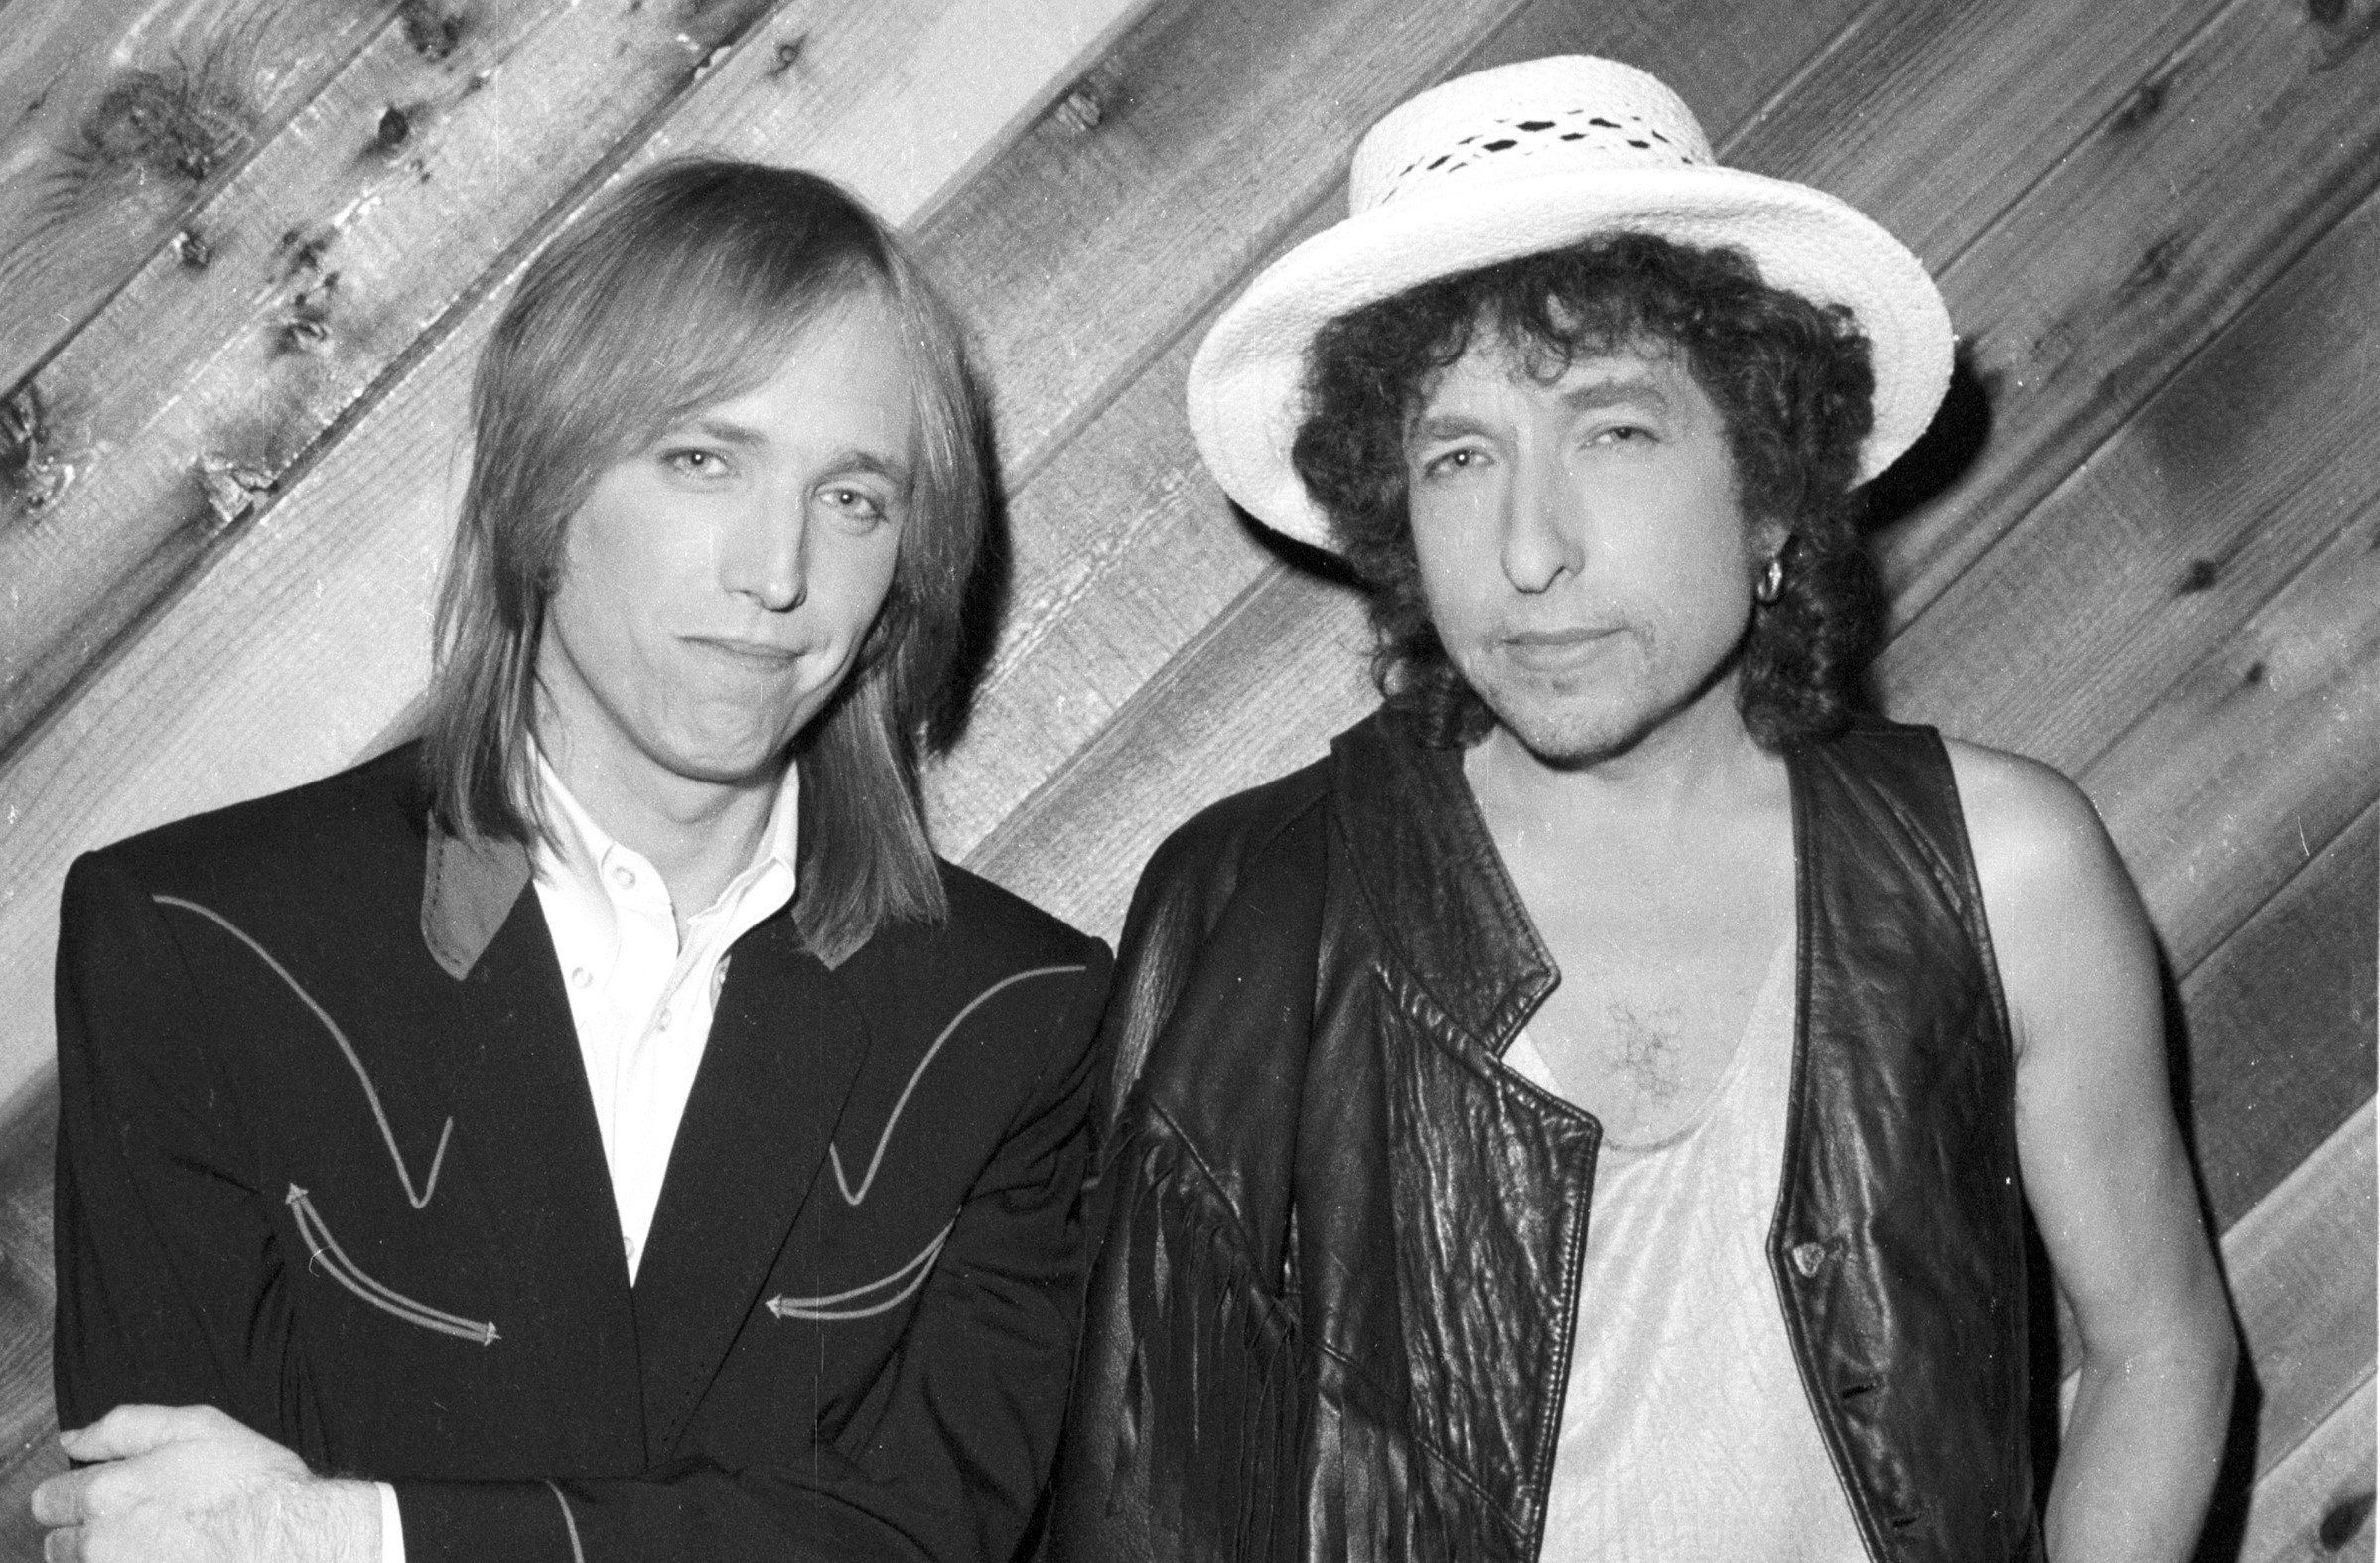 A black and white picture of Tom Petty and Bob Dylan leaning against a wood paneled wall.